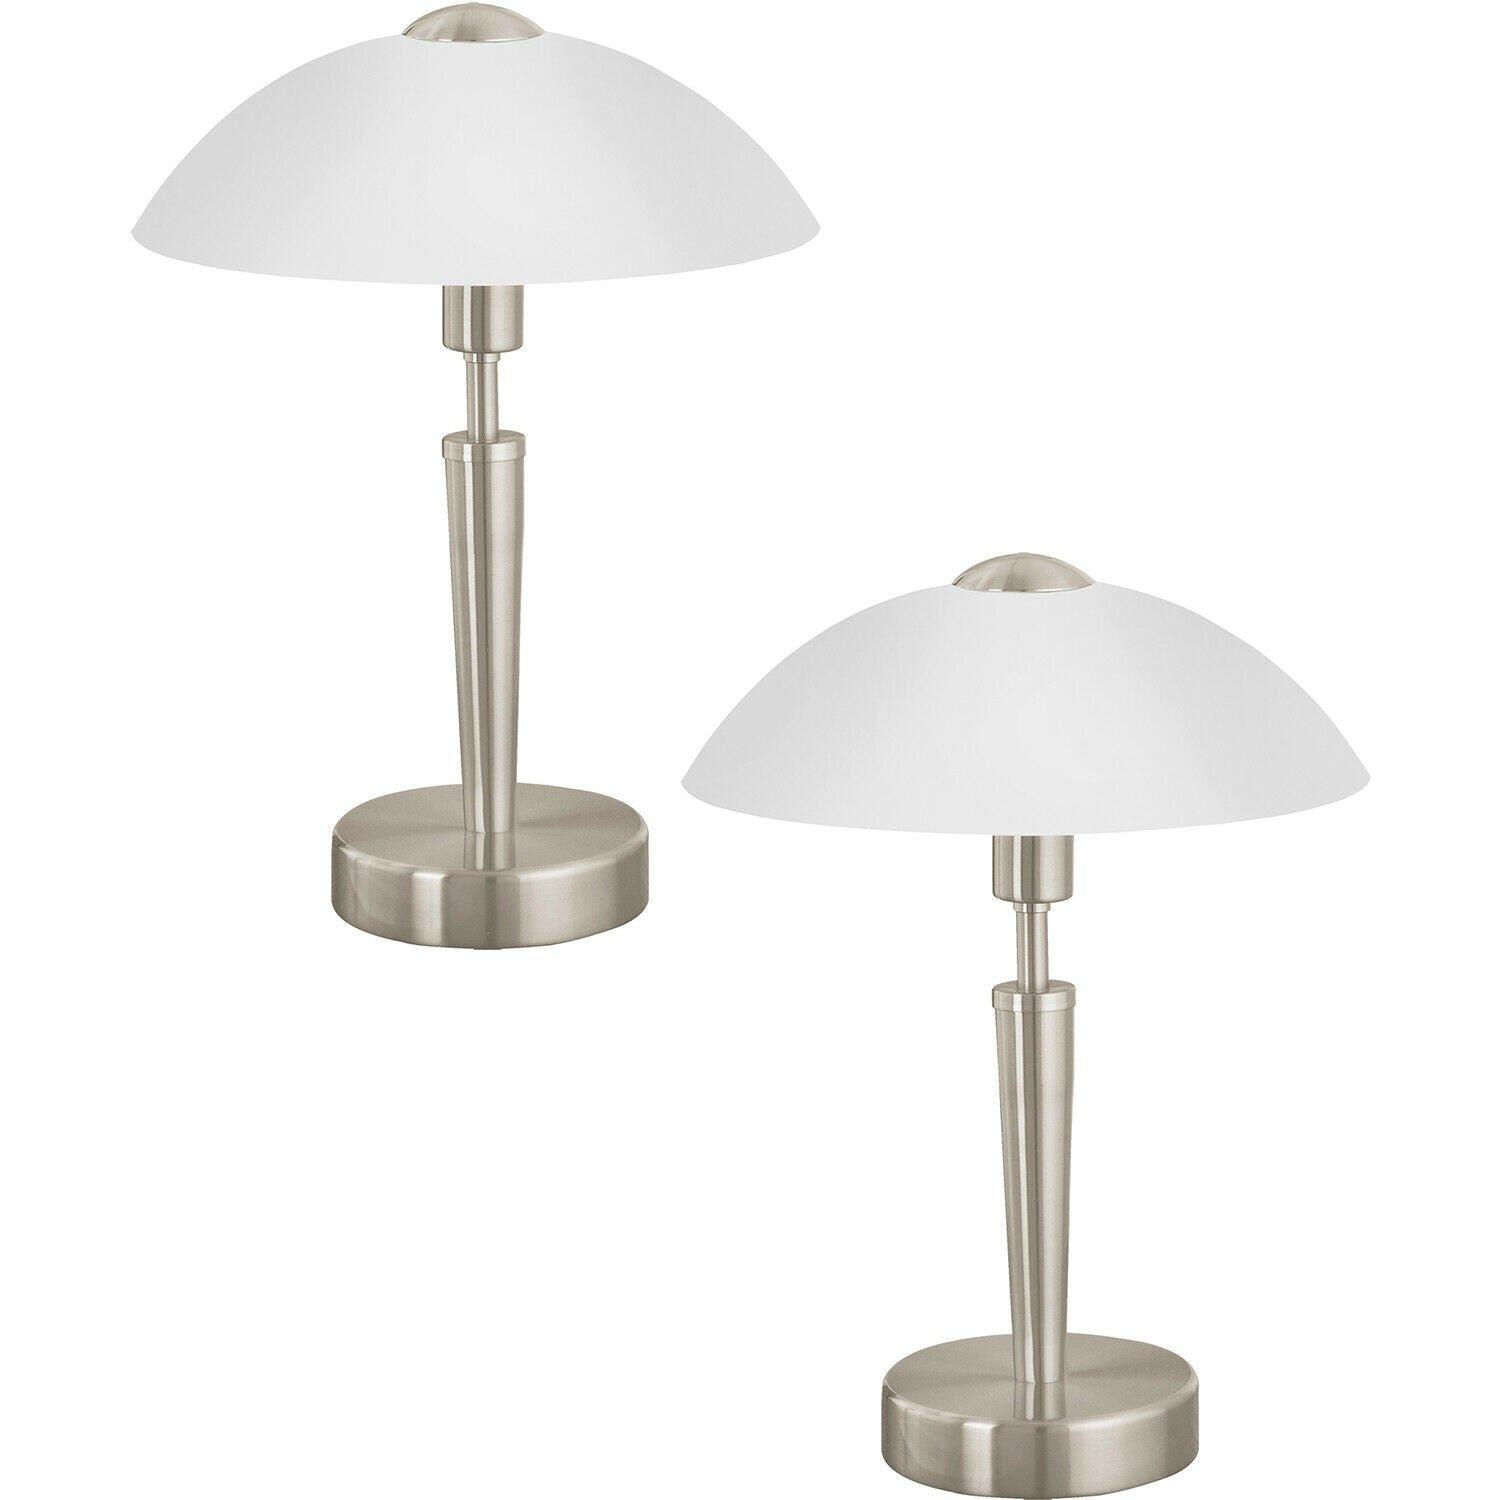 2 PACK Table Lamp Colour Satin Nickel Shade White Satinized Glass E14 1x60W